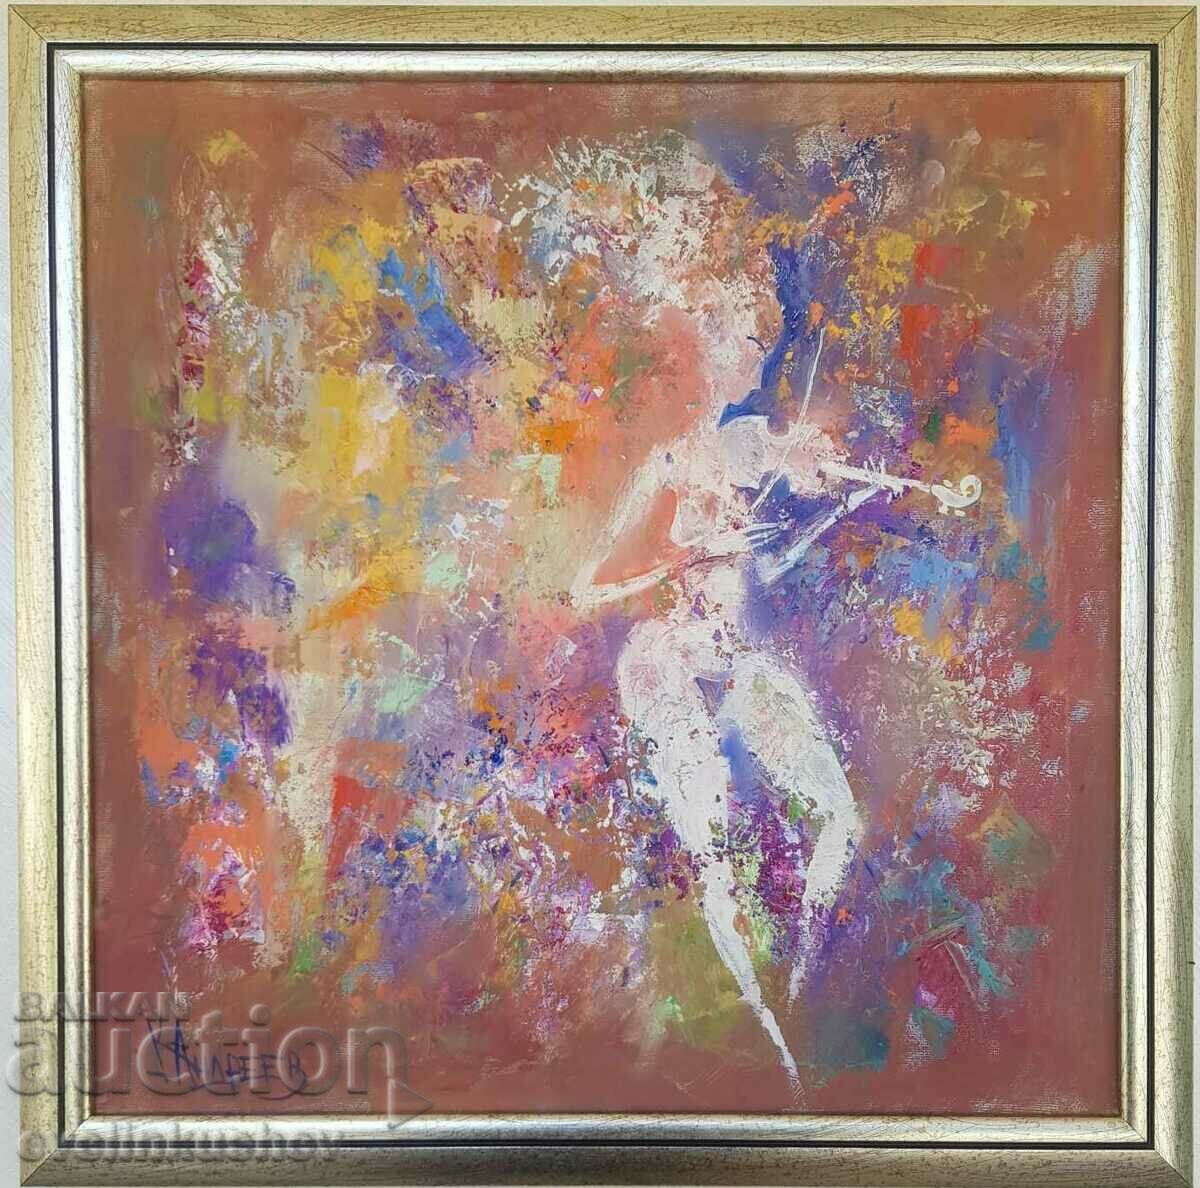 Oil painting "The language of music" Kiril Andreev